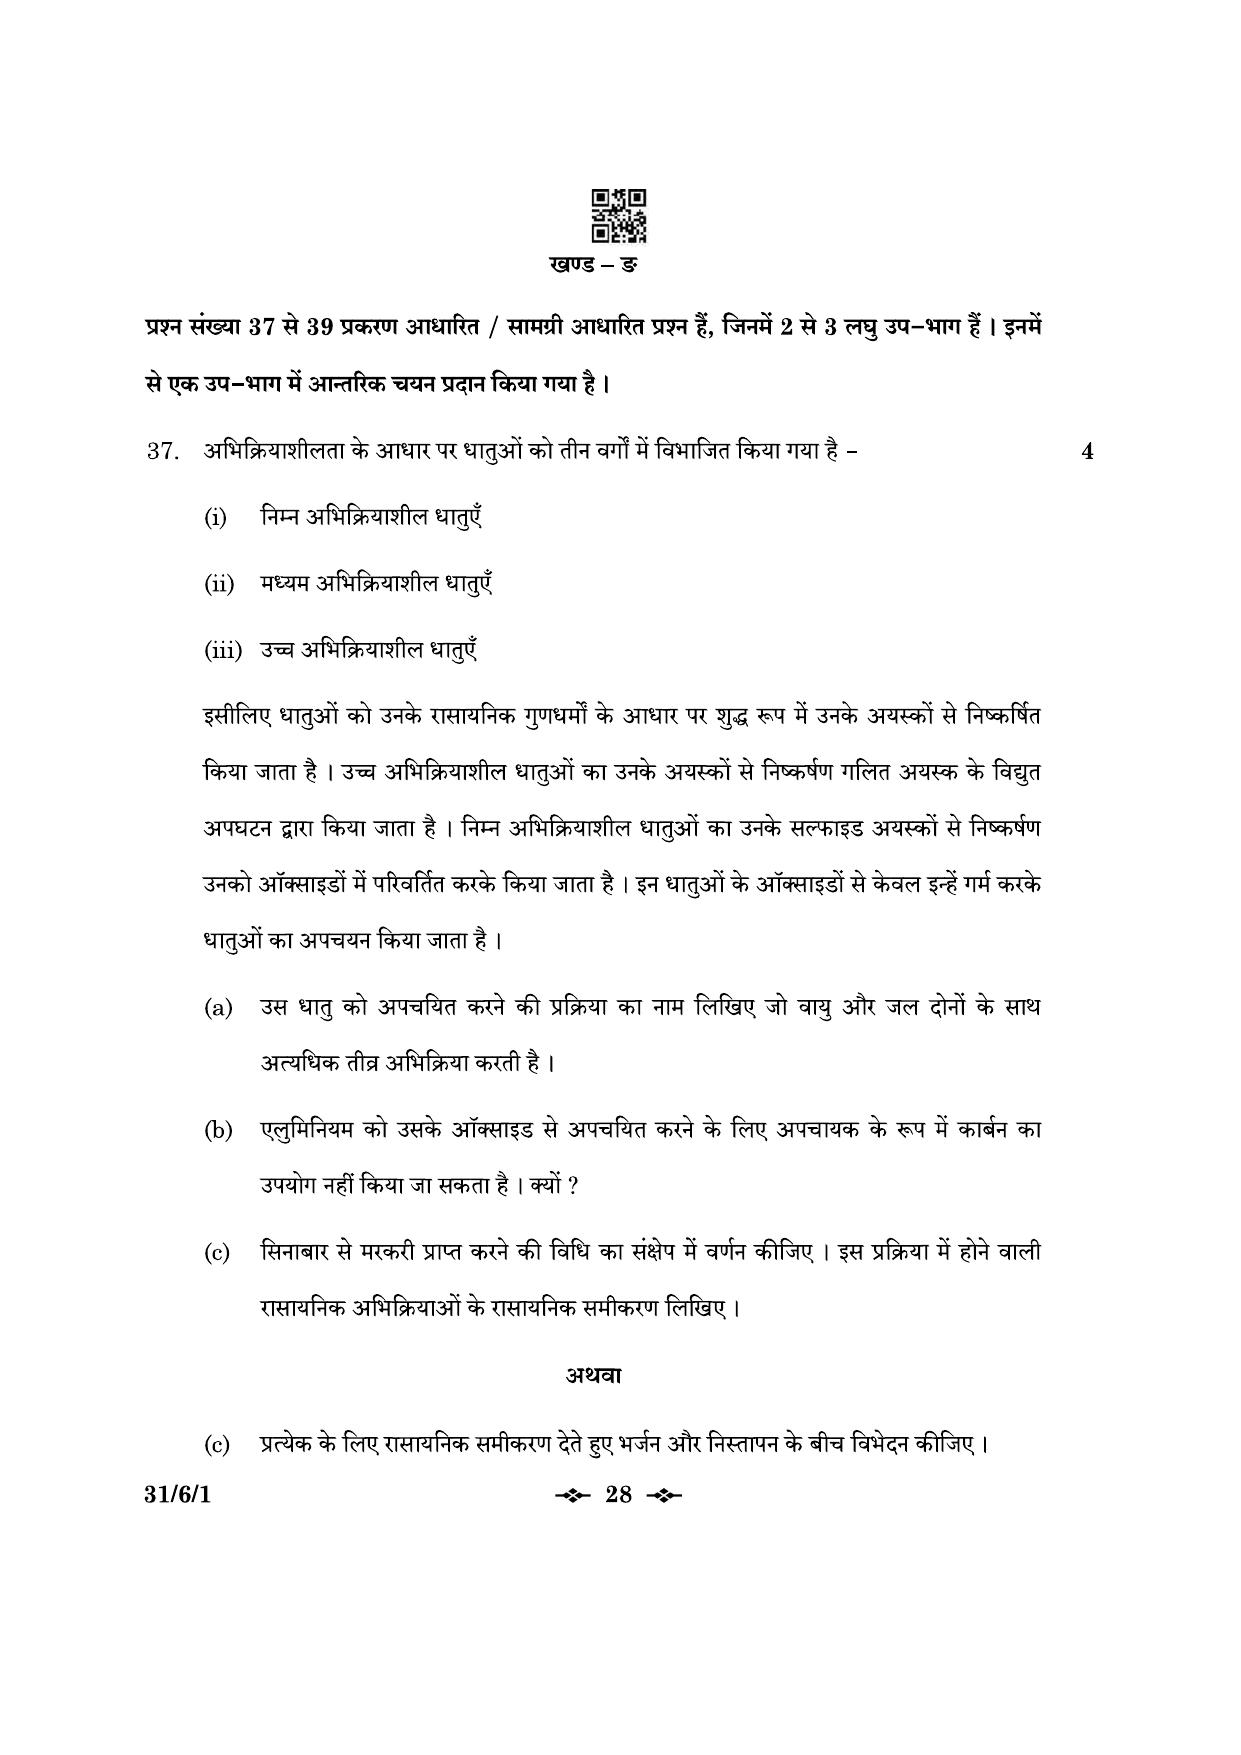 CBSE Class 10 31-6-1 Science 2023 Question Paper - Page 28